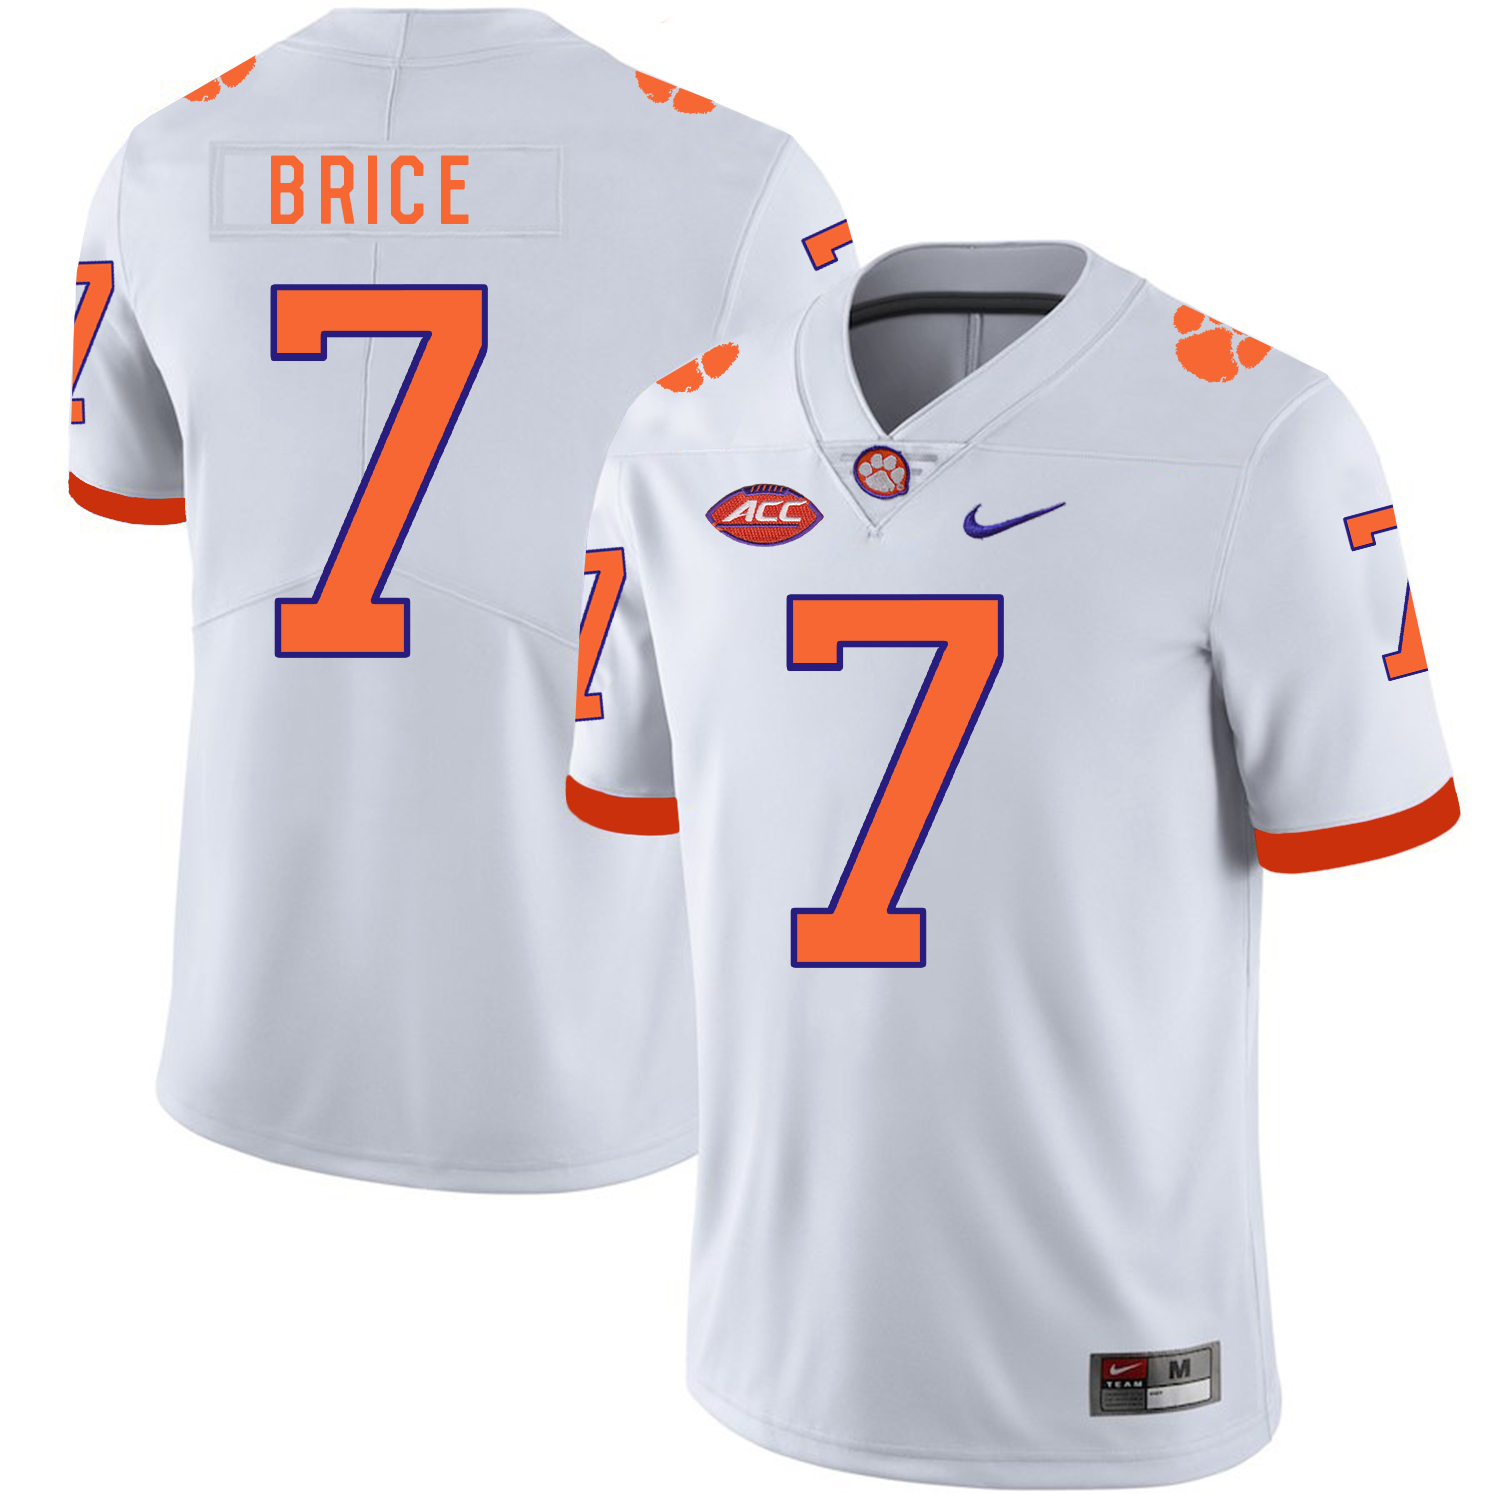 Clemson Tigers 7 Chase Brice White Nike College Football Jersey